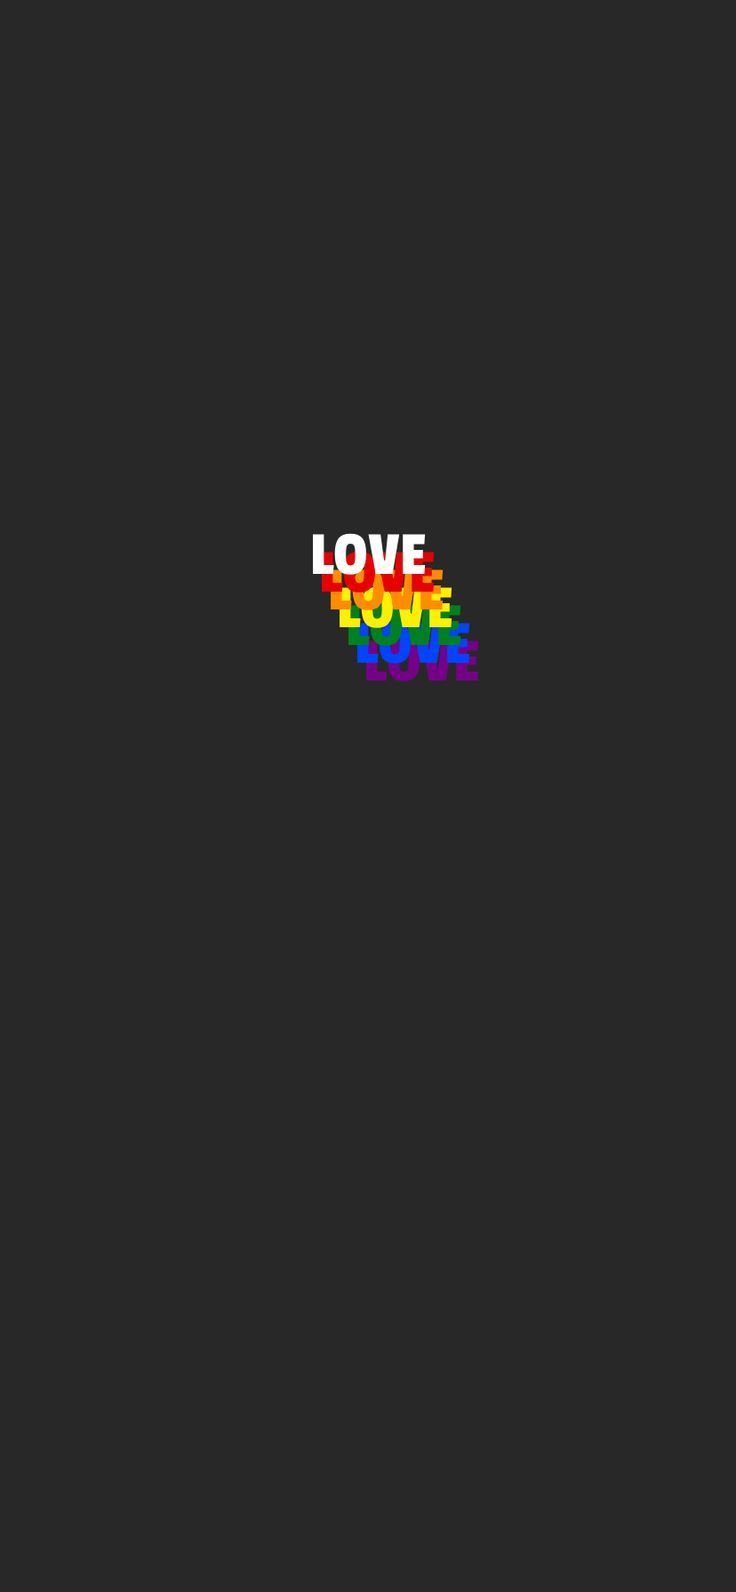 The wallpaper is a black background with rainbow colors - Pride, gay